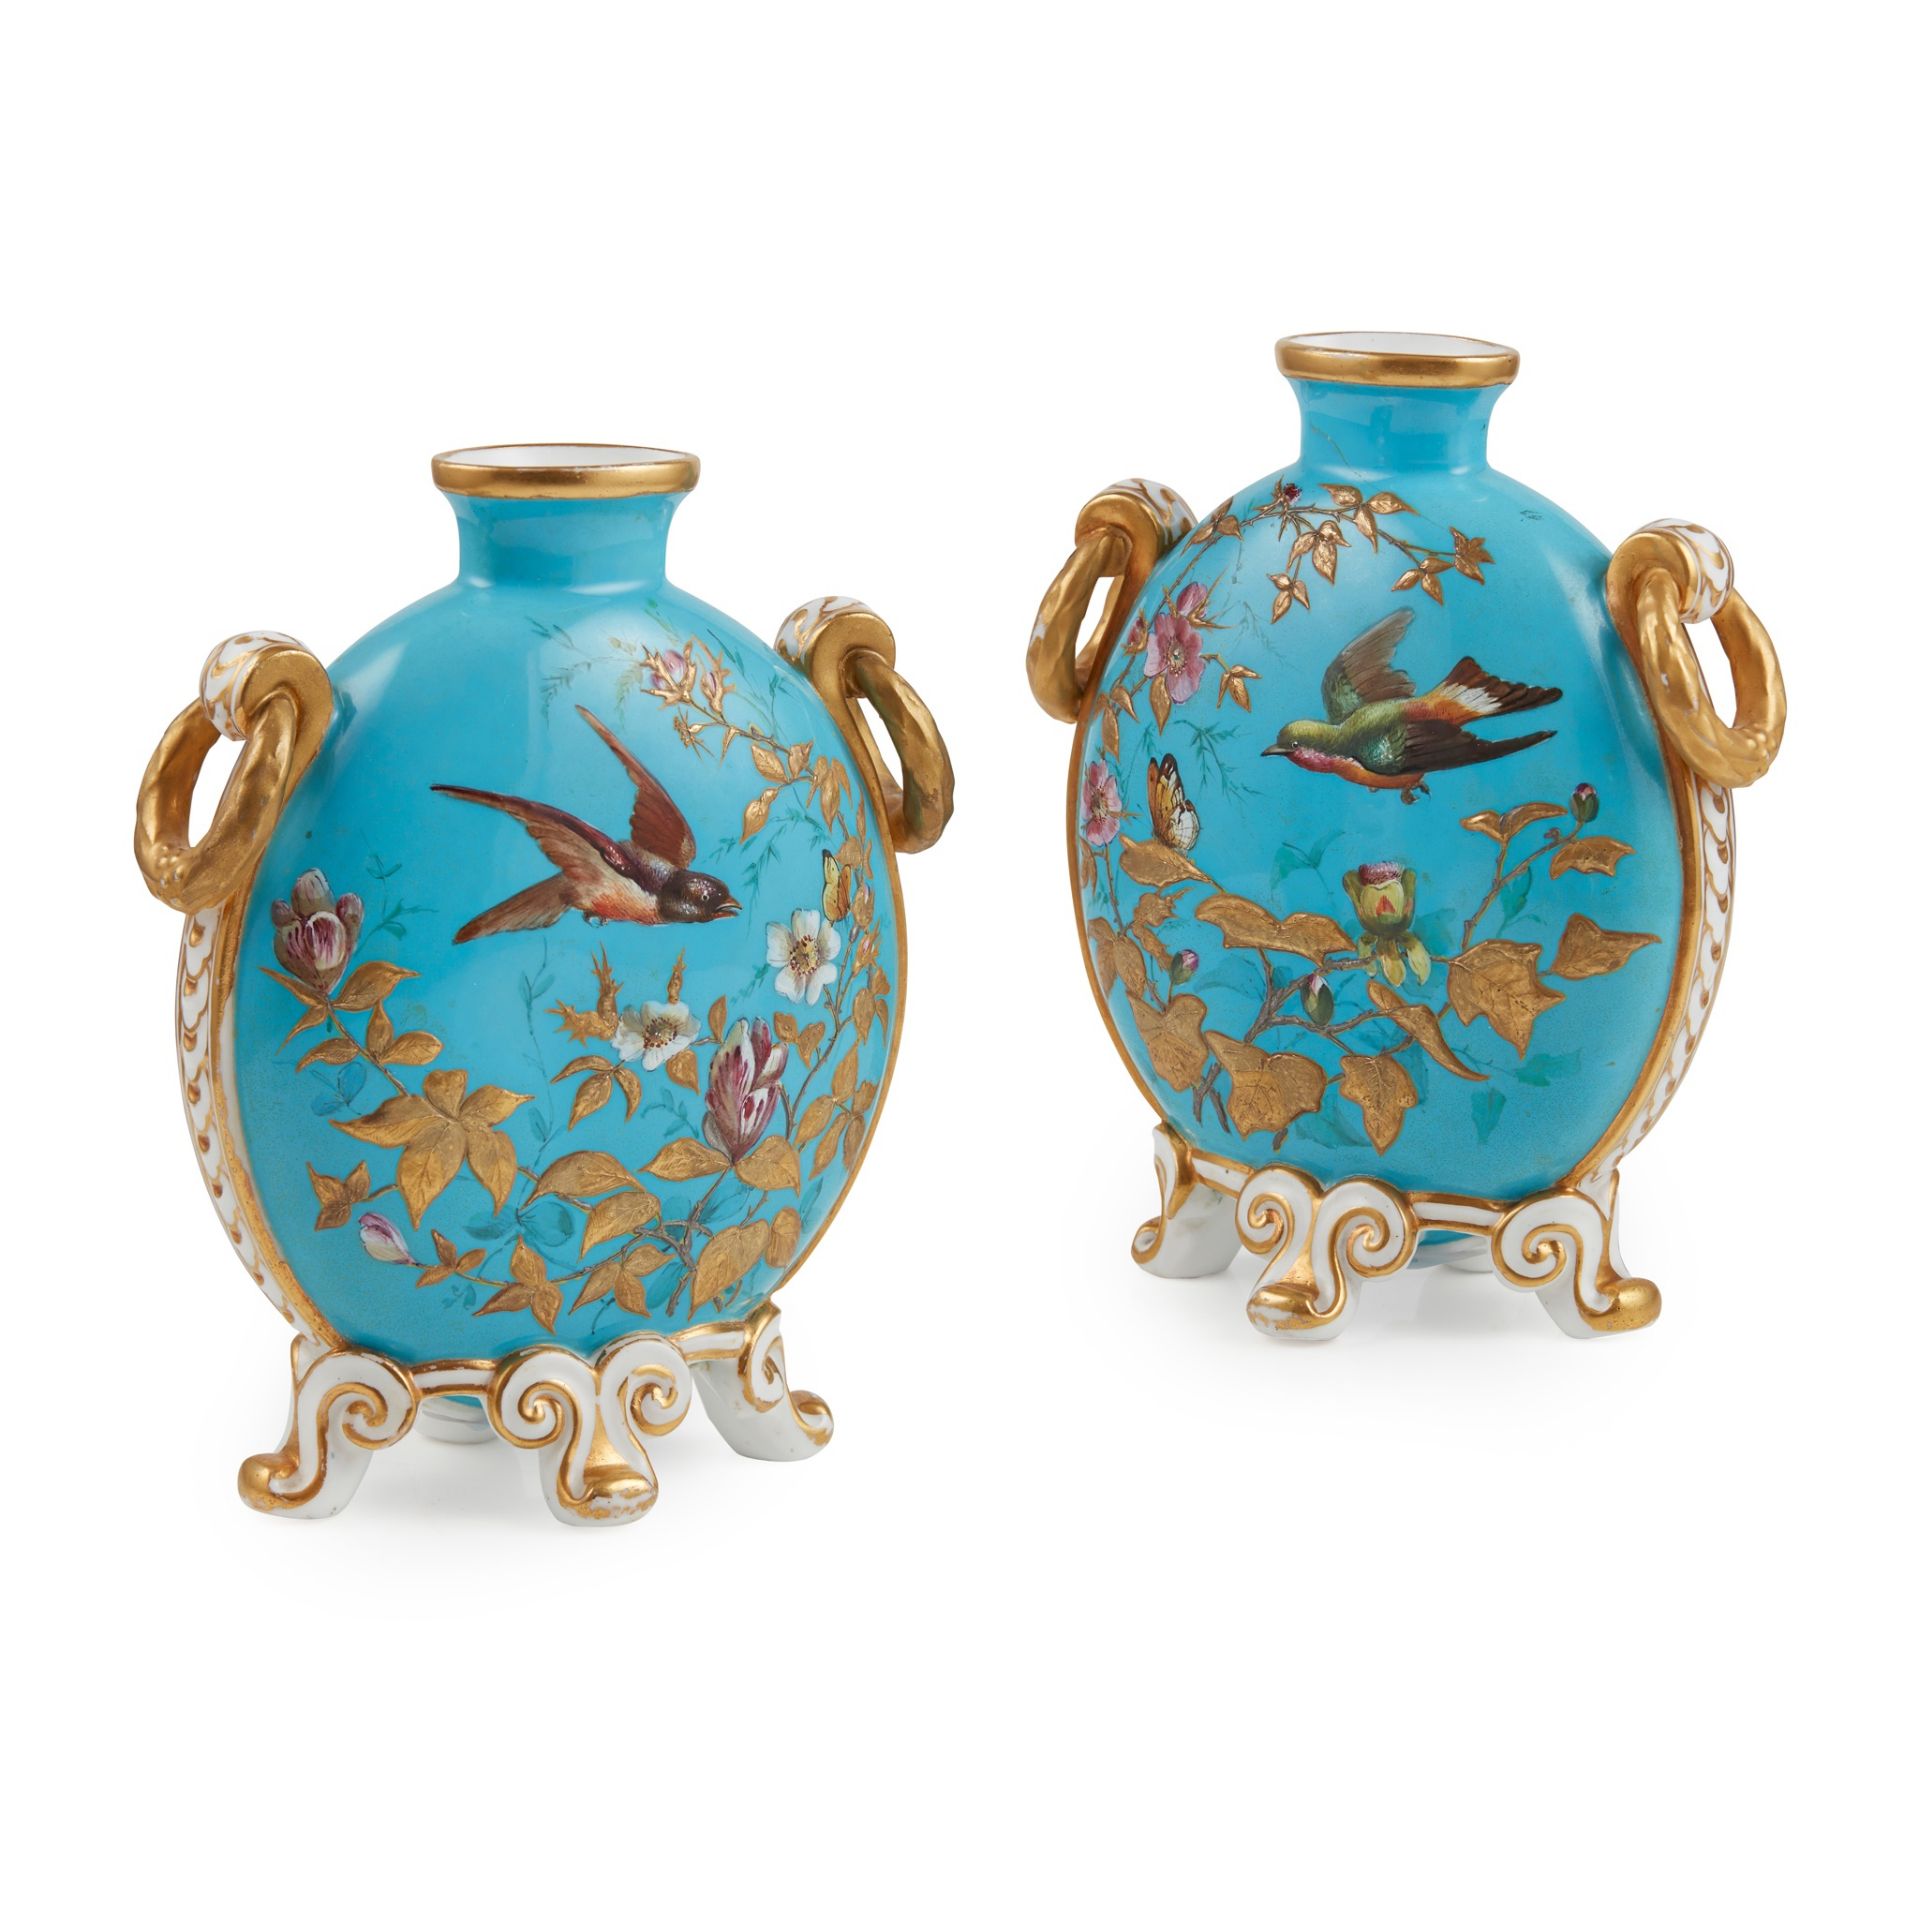 PAIR OF DERBY CROWN PORCELAIN MOONFLASKS LATE 19TH CENTURY